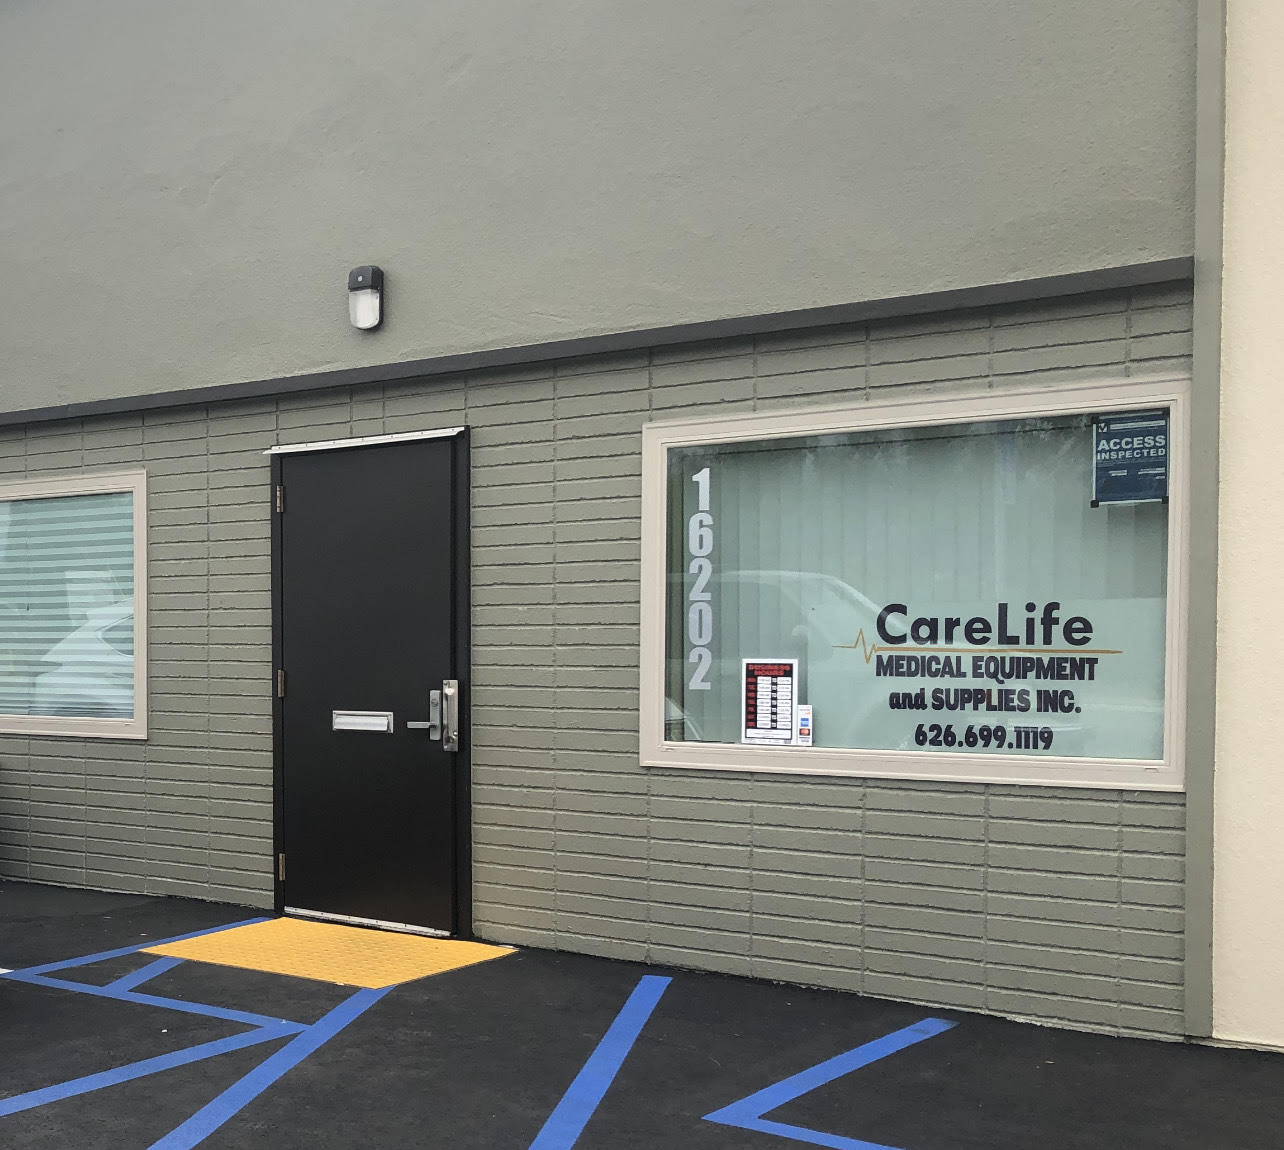 Carelife Medical Equipment And Supplies